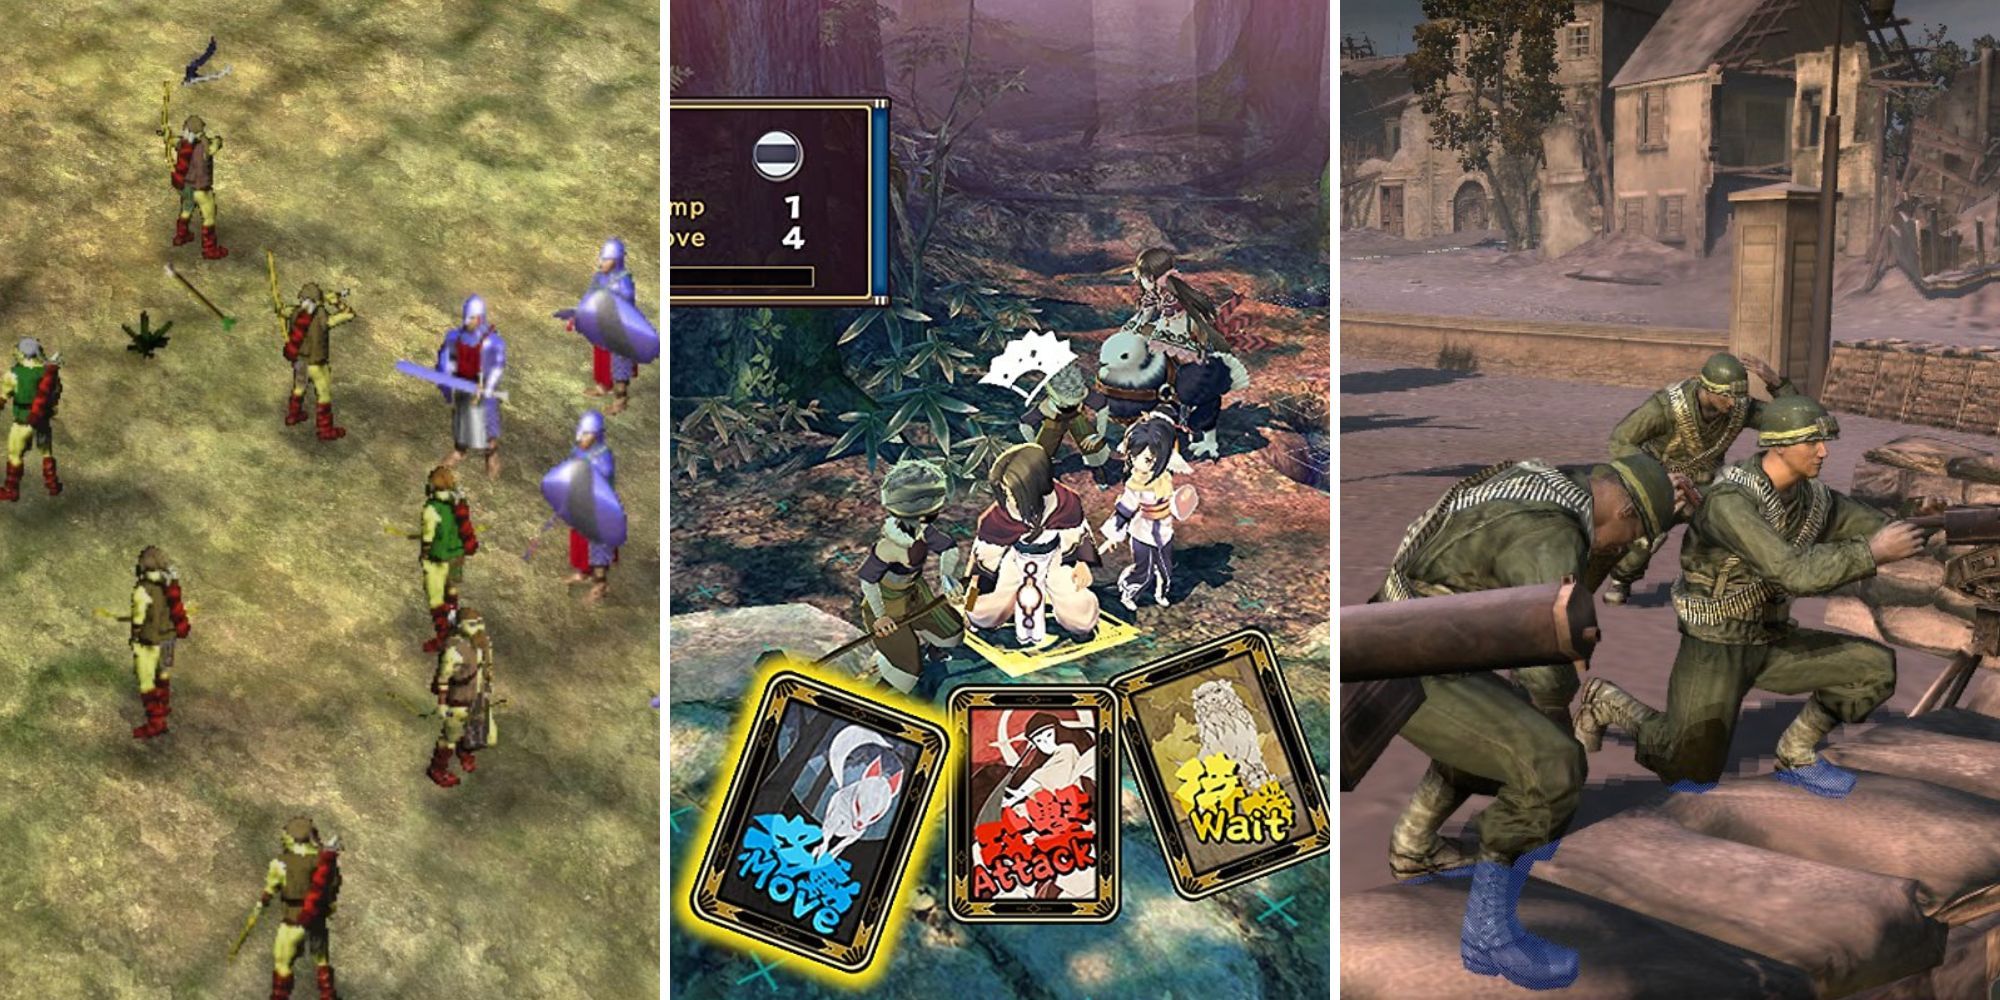 A grid of games showing the strategy titles Myth: The Fallen Lords, Utawarerumono: Mask Of Deception, and Company of Heroes